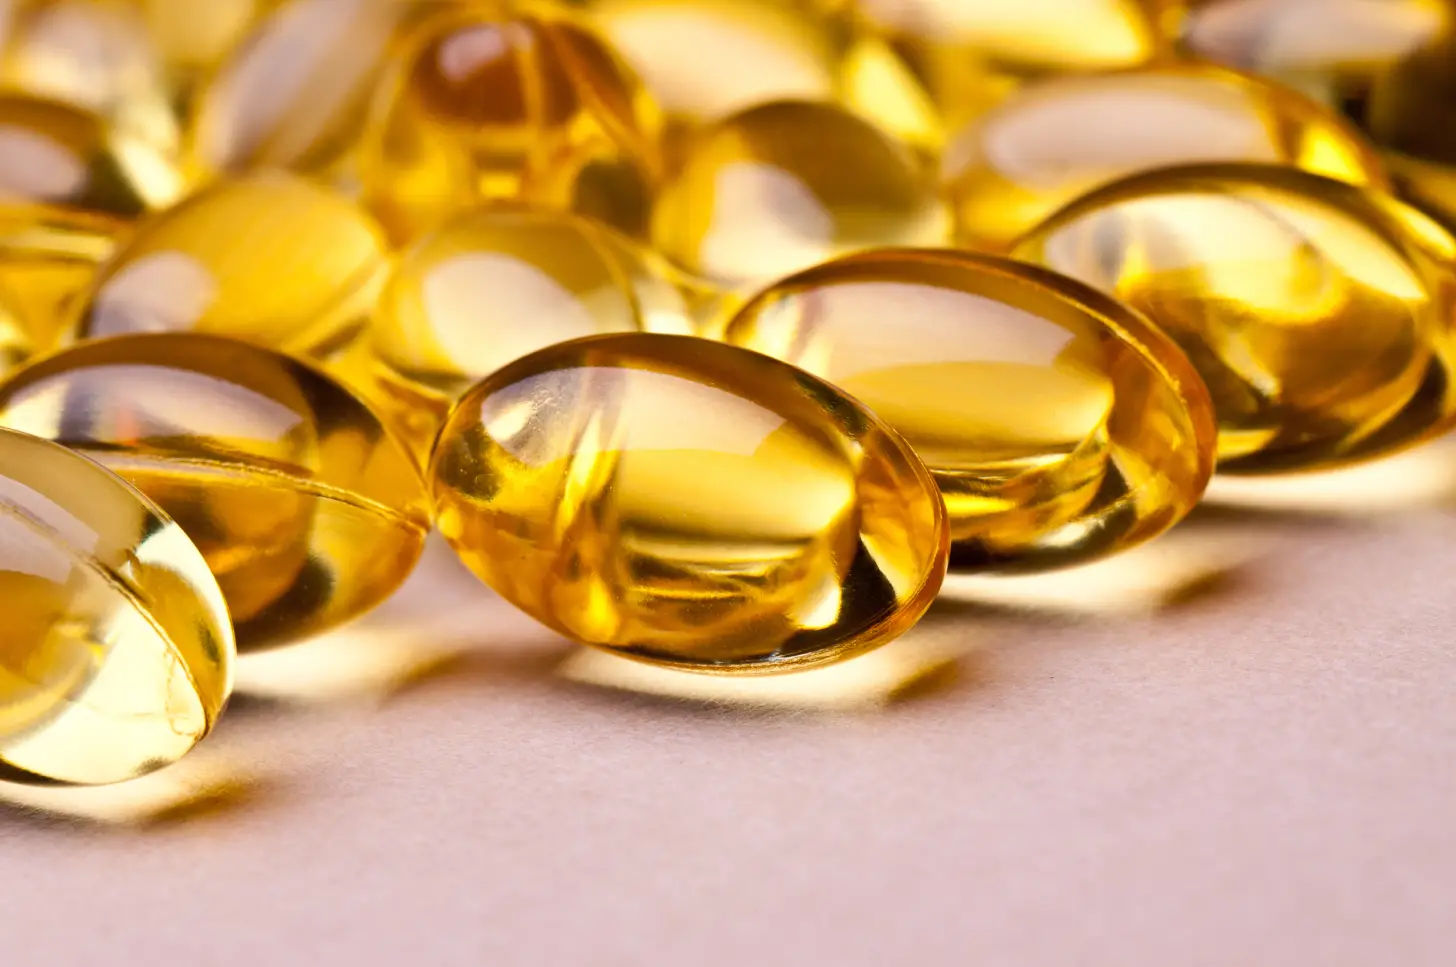 Vitamin D may protect against colitis adverse events in patients taking ...